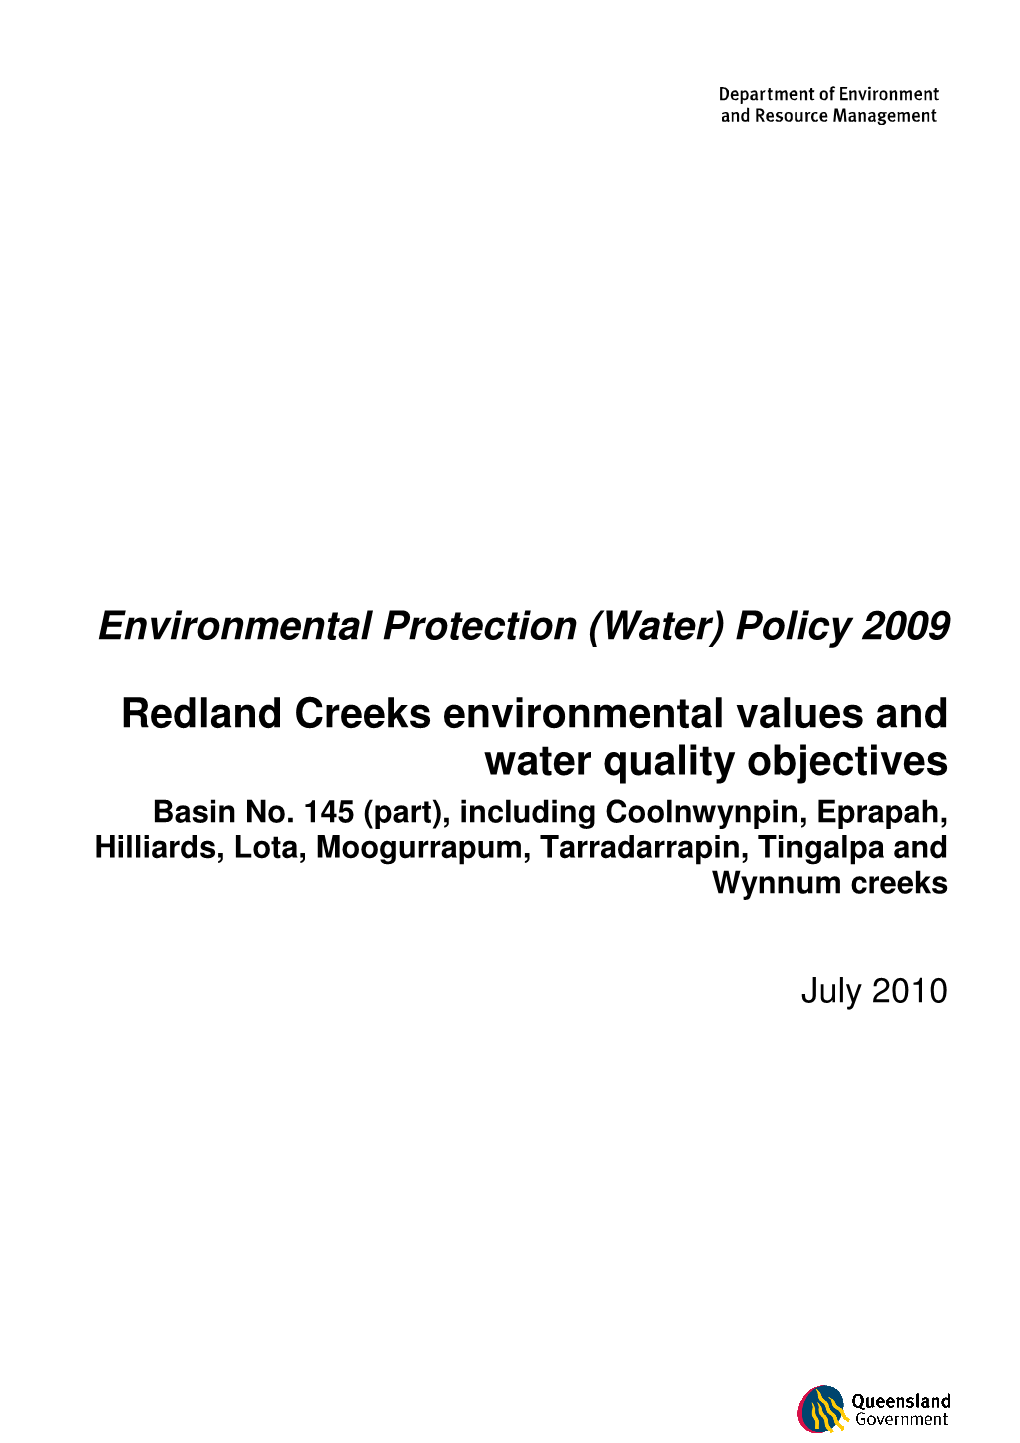 Redland Creeks Environmental Values and Water Quality Objectives Basin No